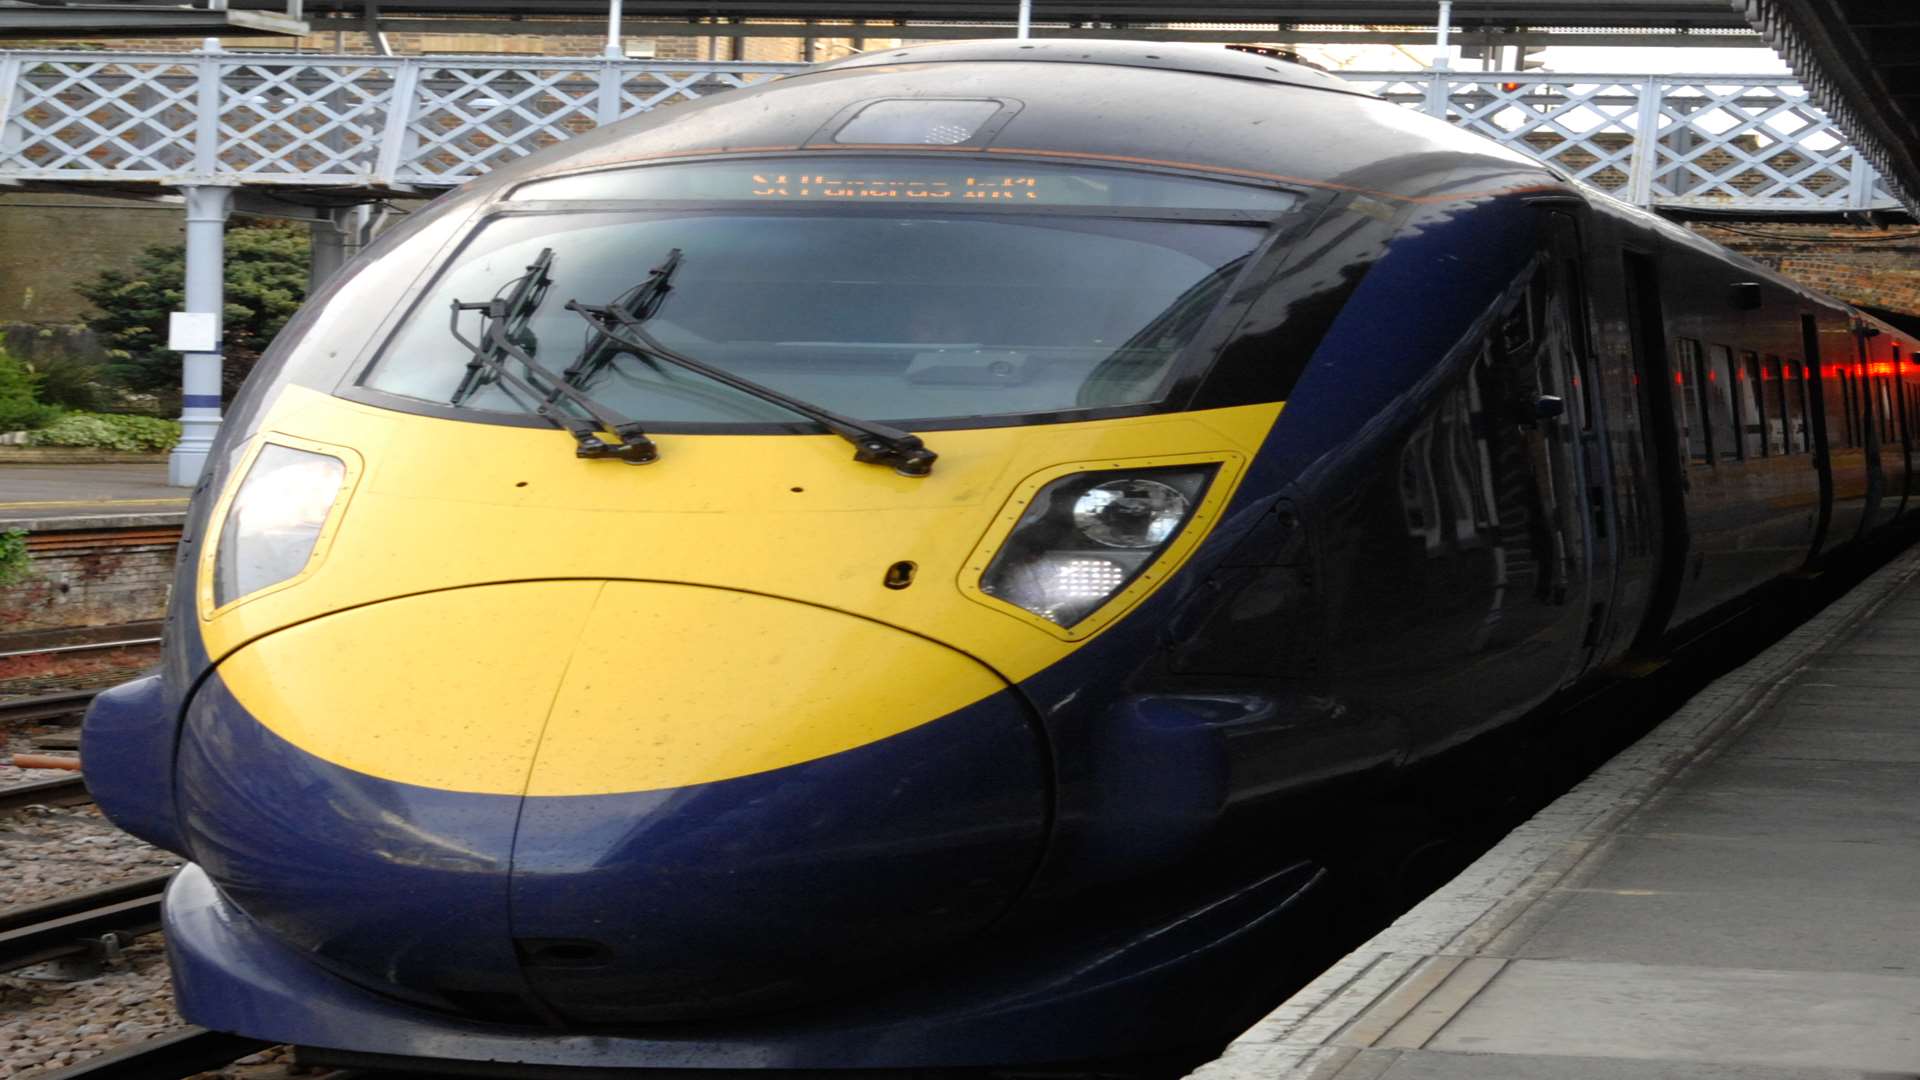 The Kent Messenger newspaper is calling on the Department for Transport to retain the much-valued high speed services from Maidstone West to London St Pancras.